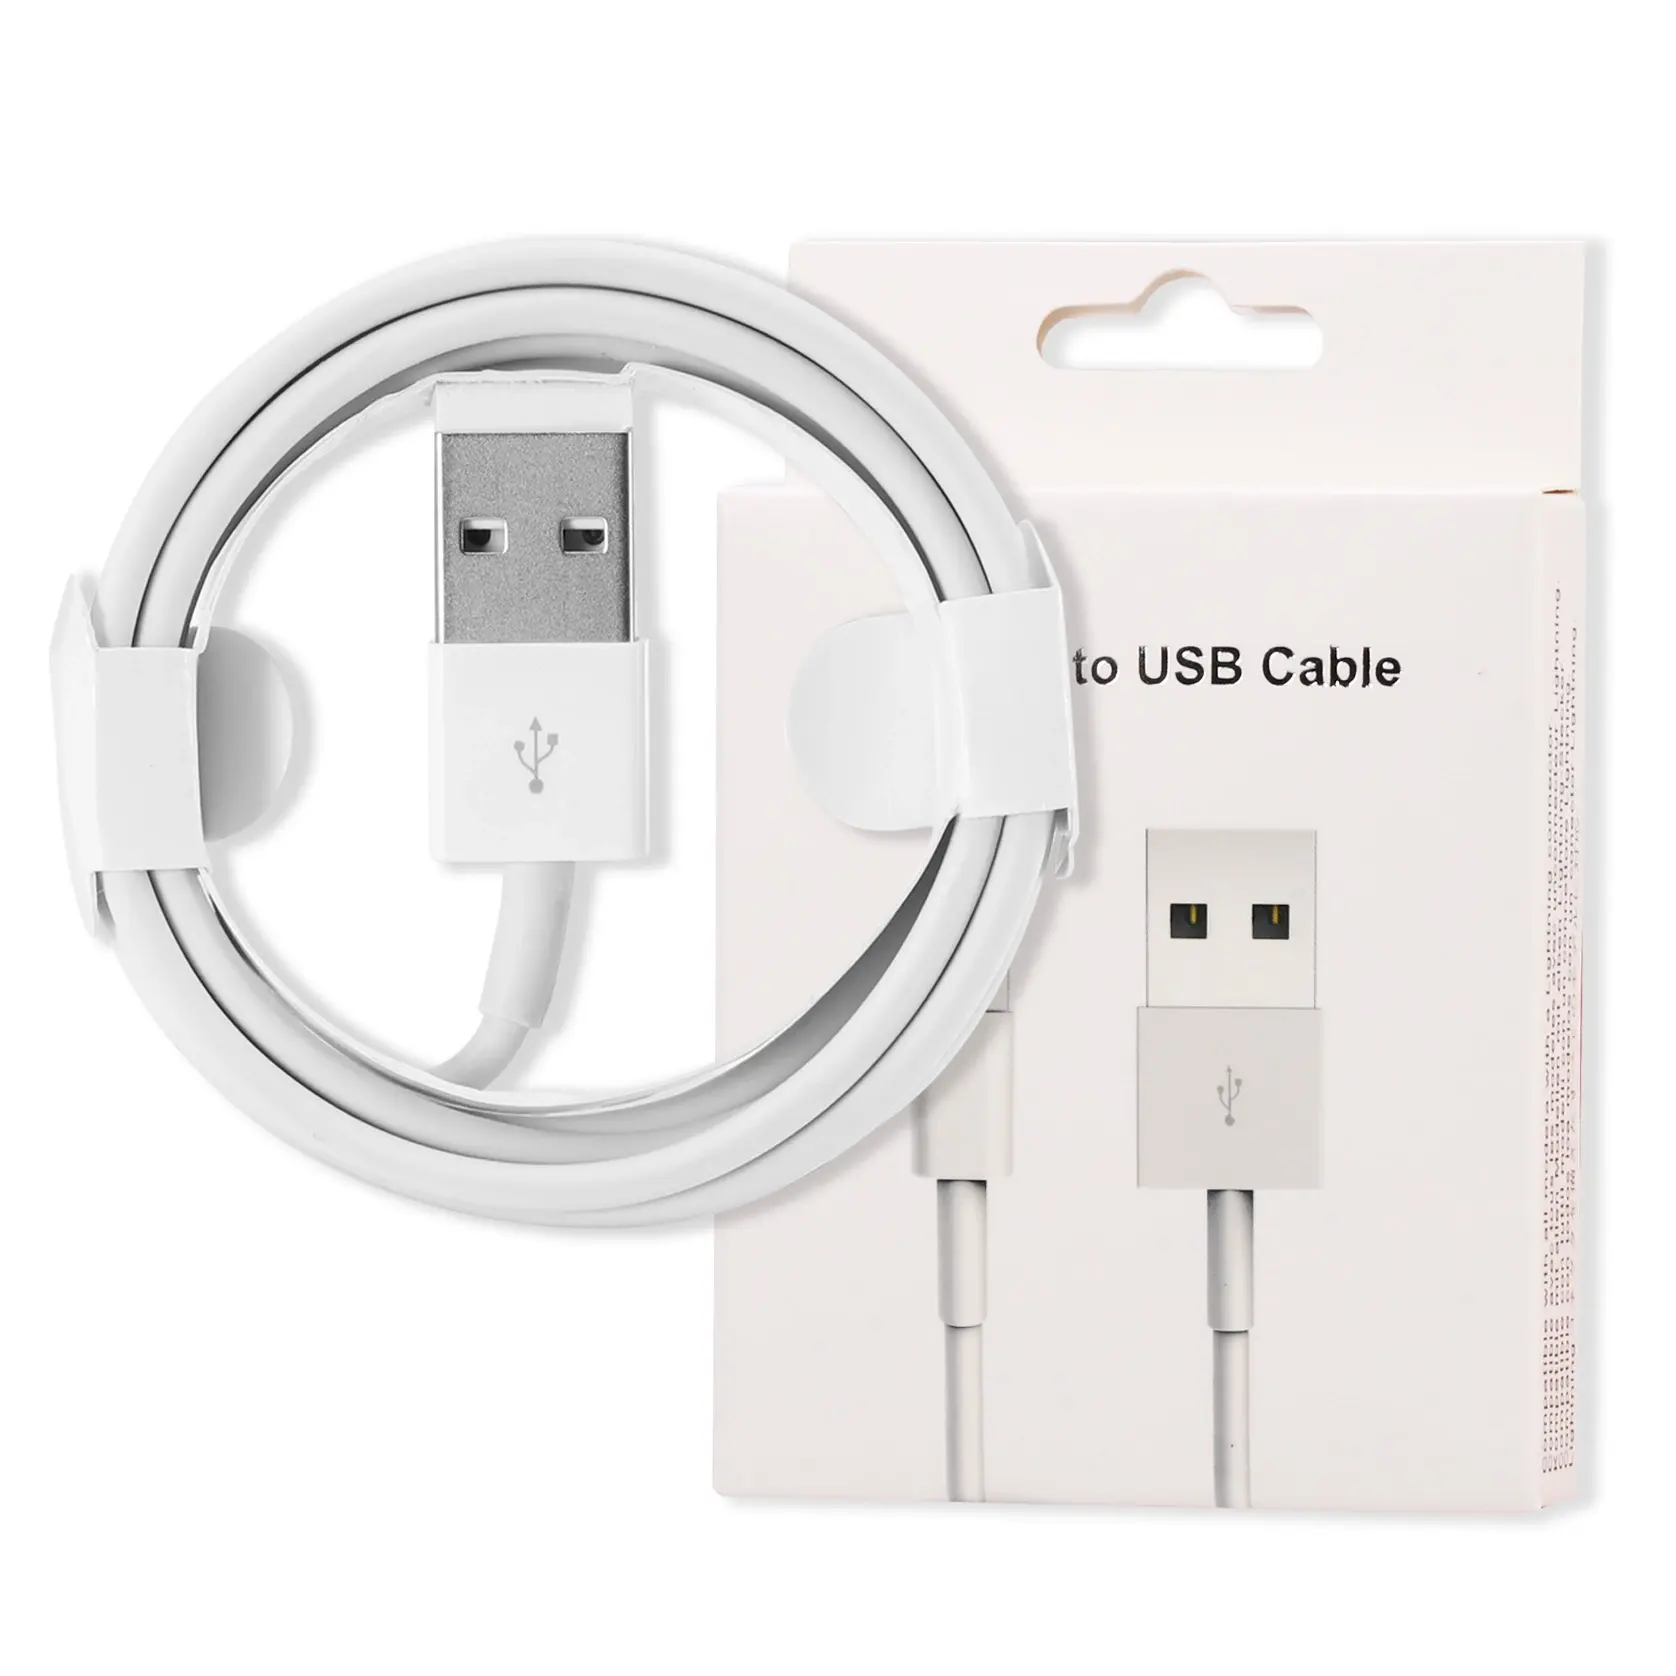 High quality 2.1A fast charging phone usb data cable for iPhone mobile phone charger for Lightning cable with retail box